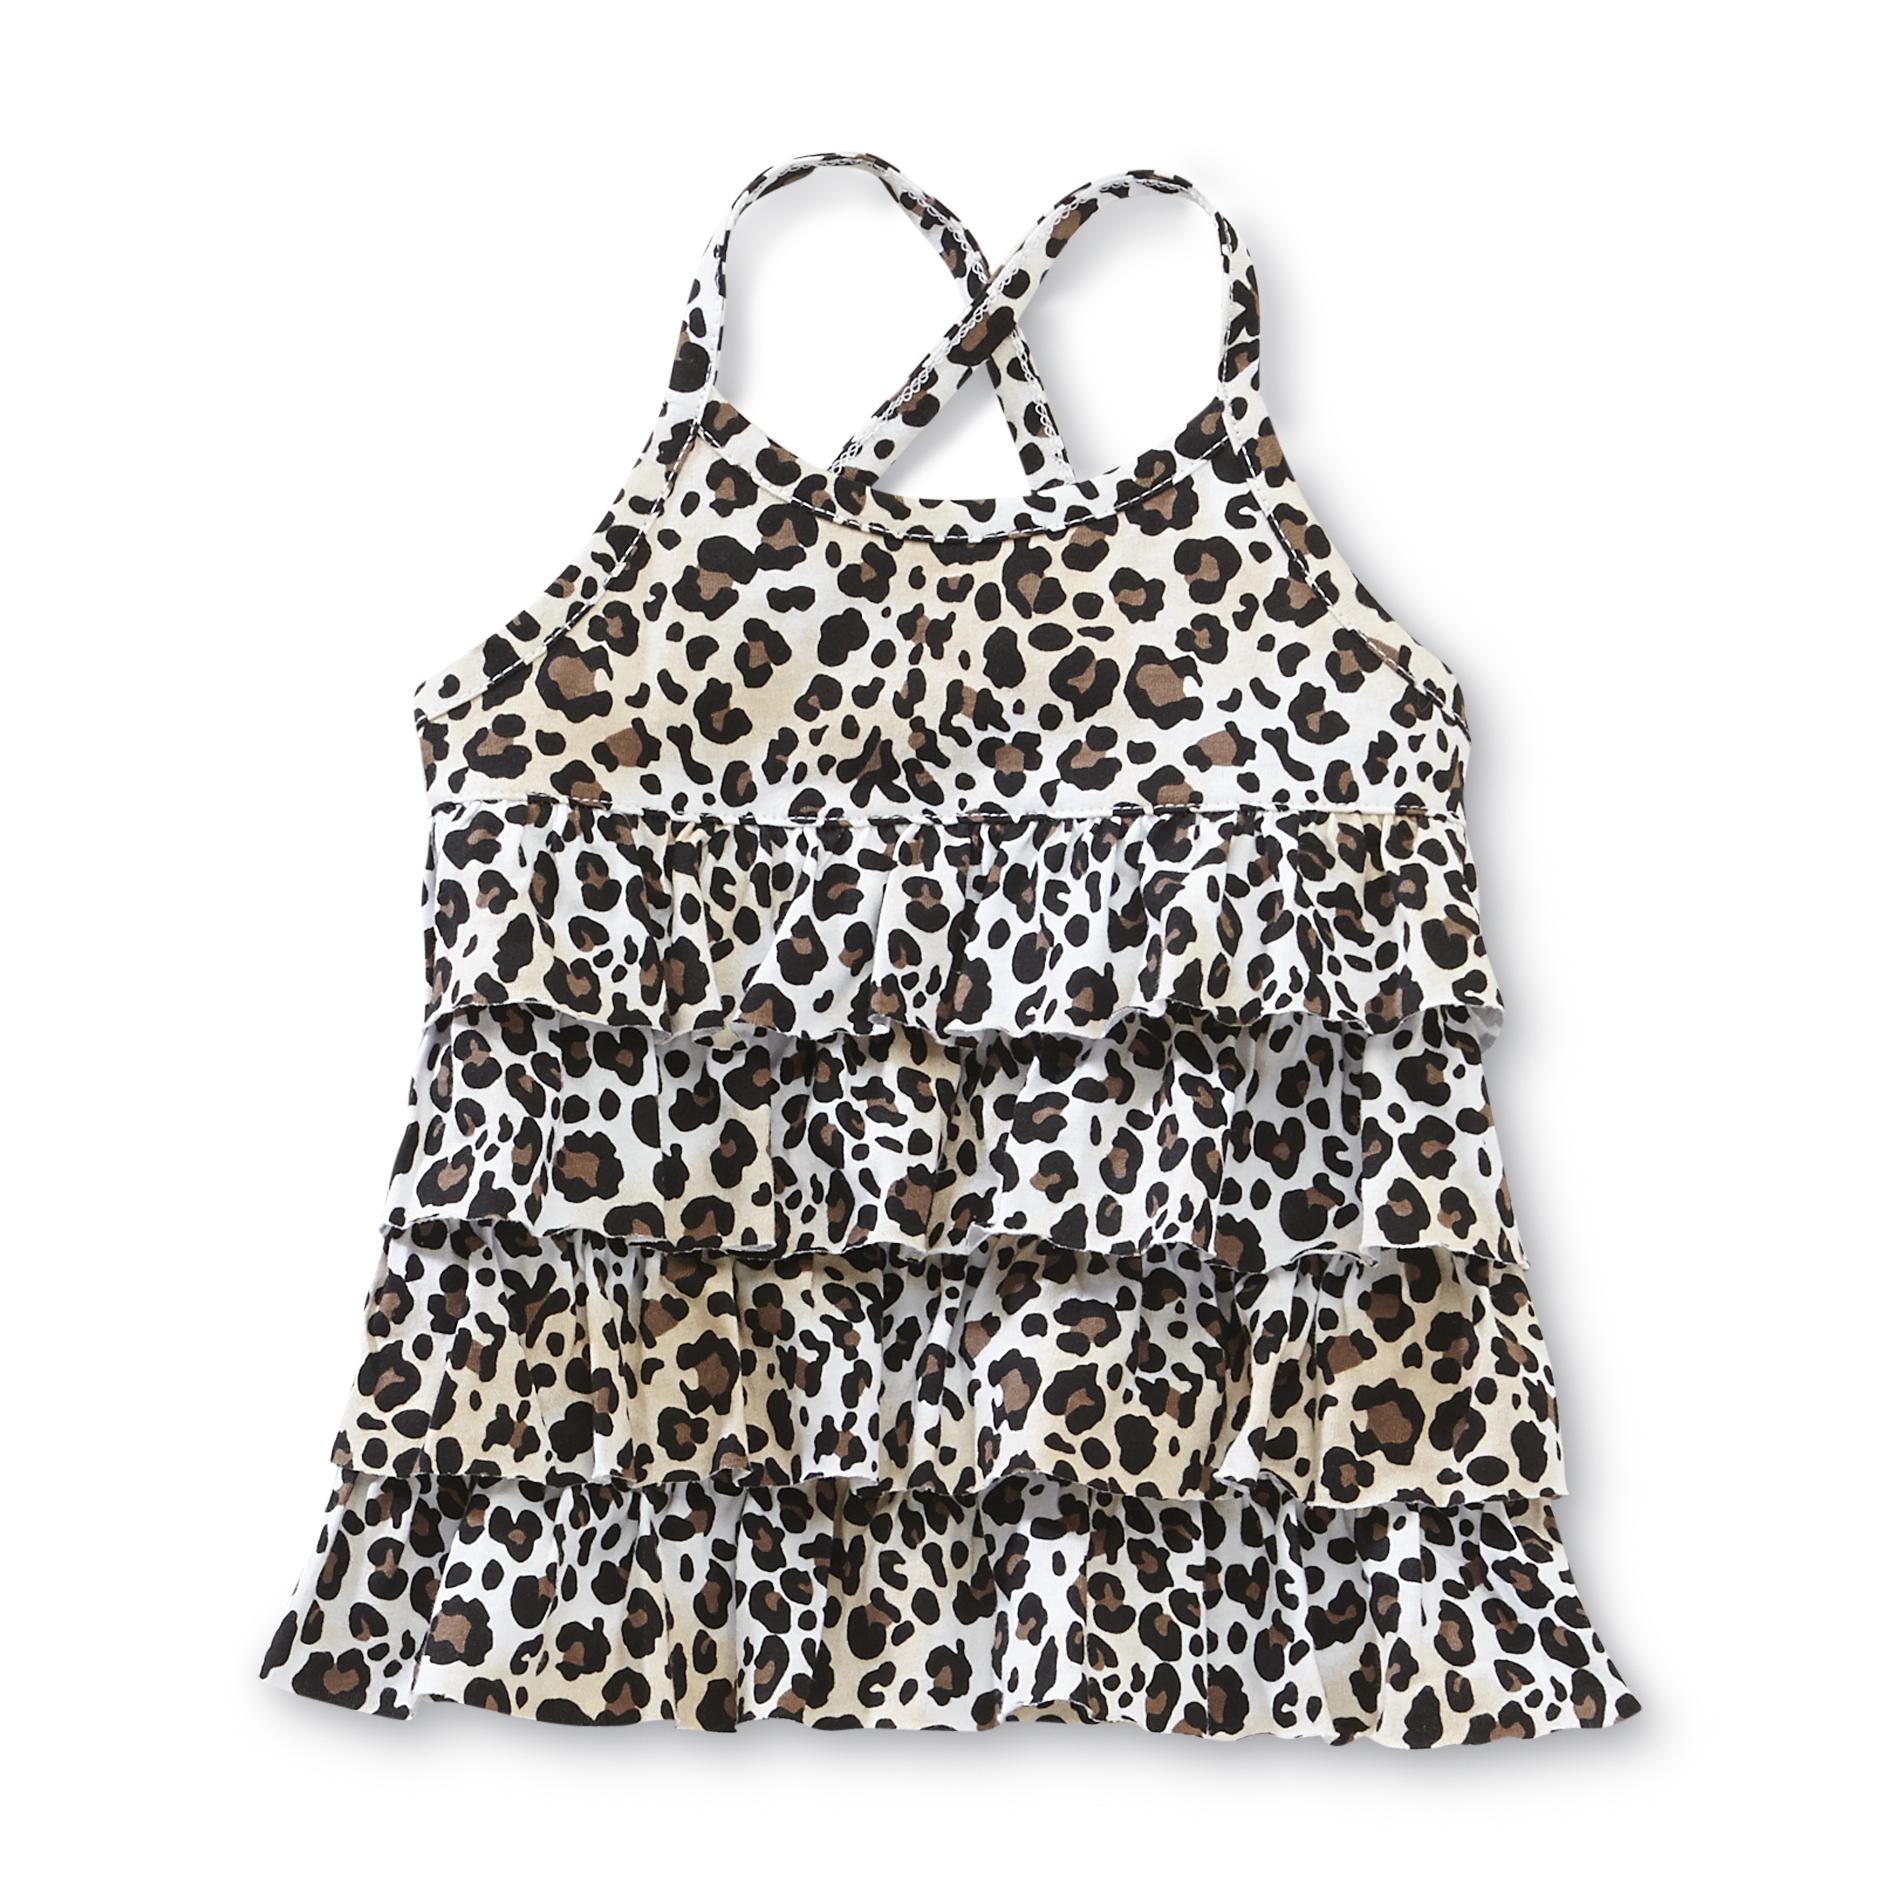 Toughskins Infant & Toddler Girl's Tiered Ruffle Tank Top - Leopard Print